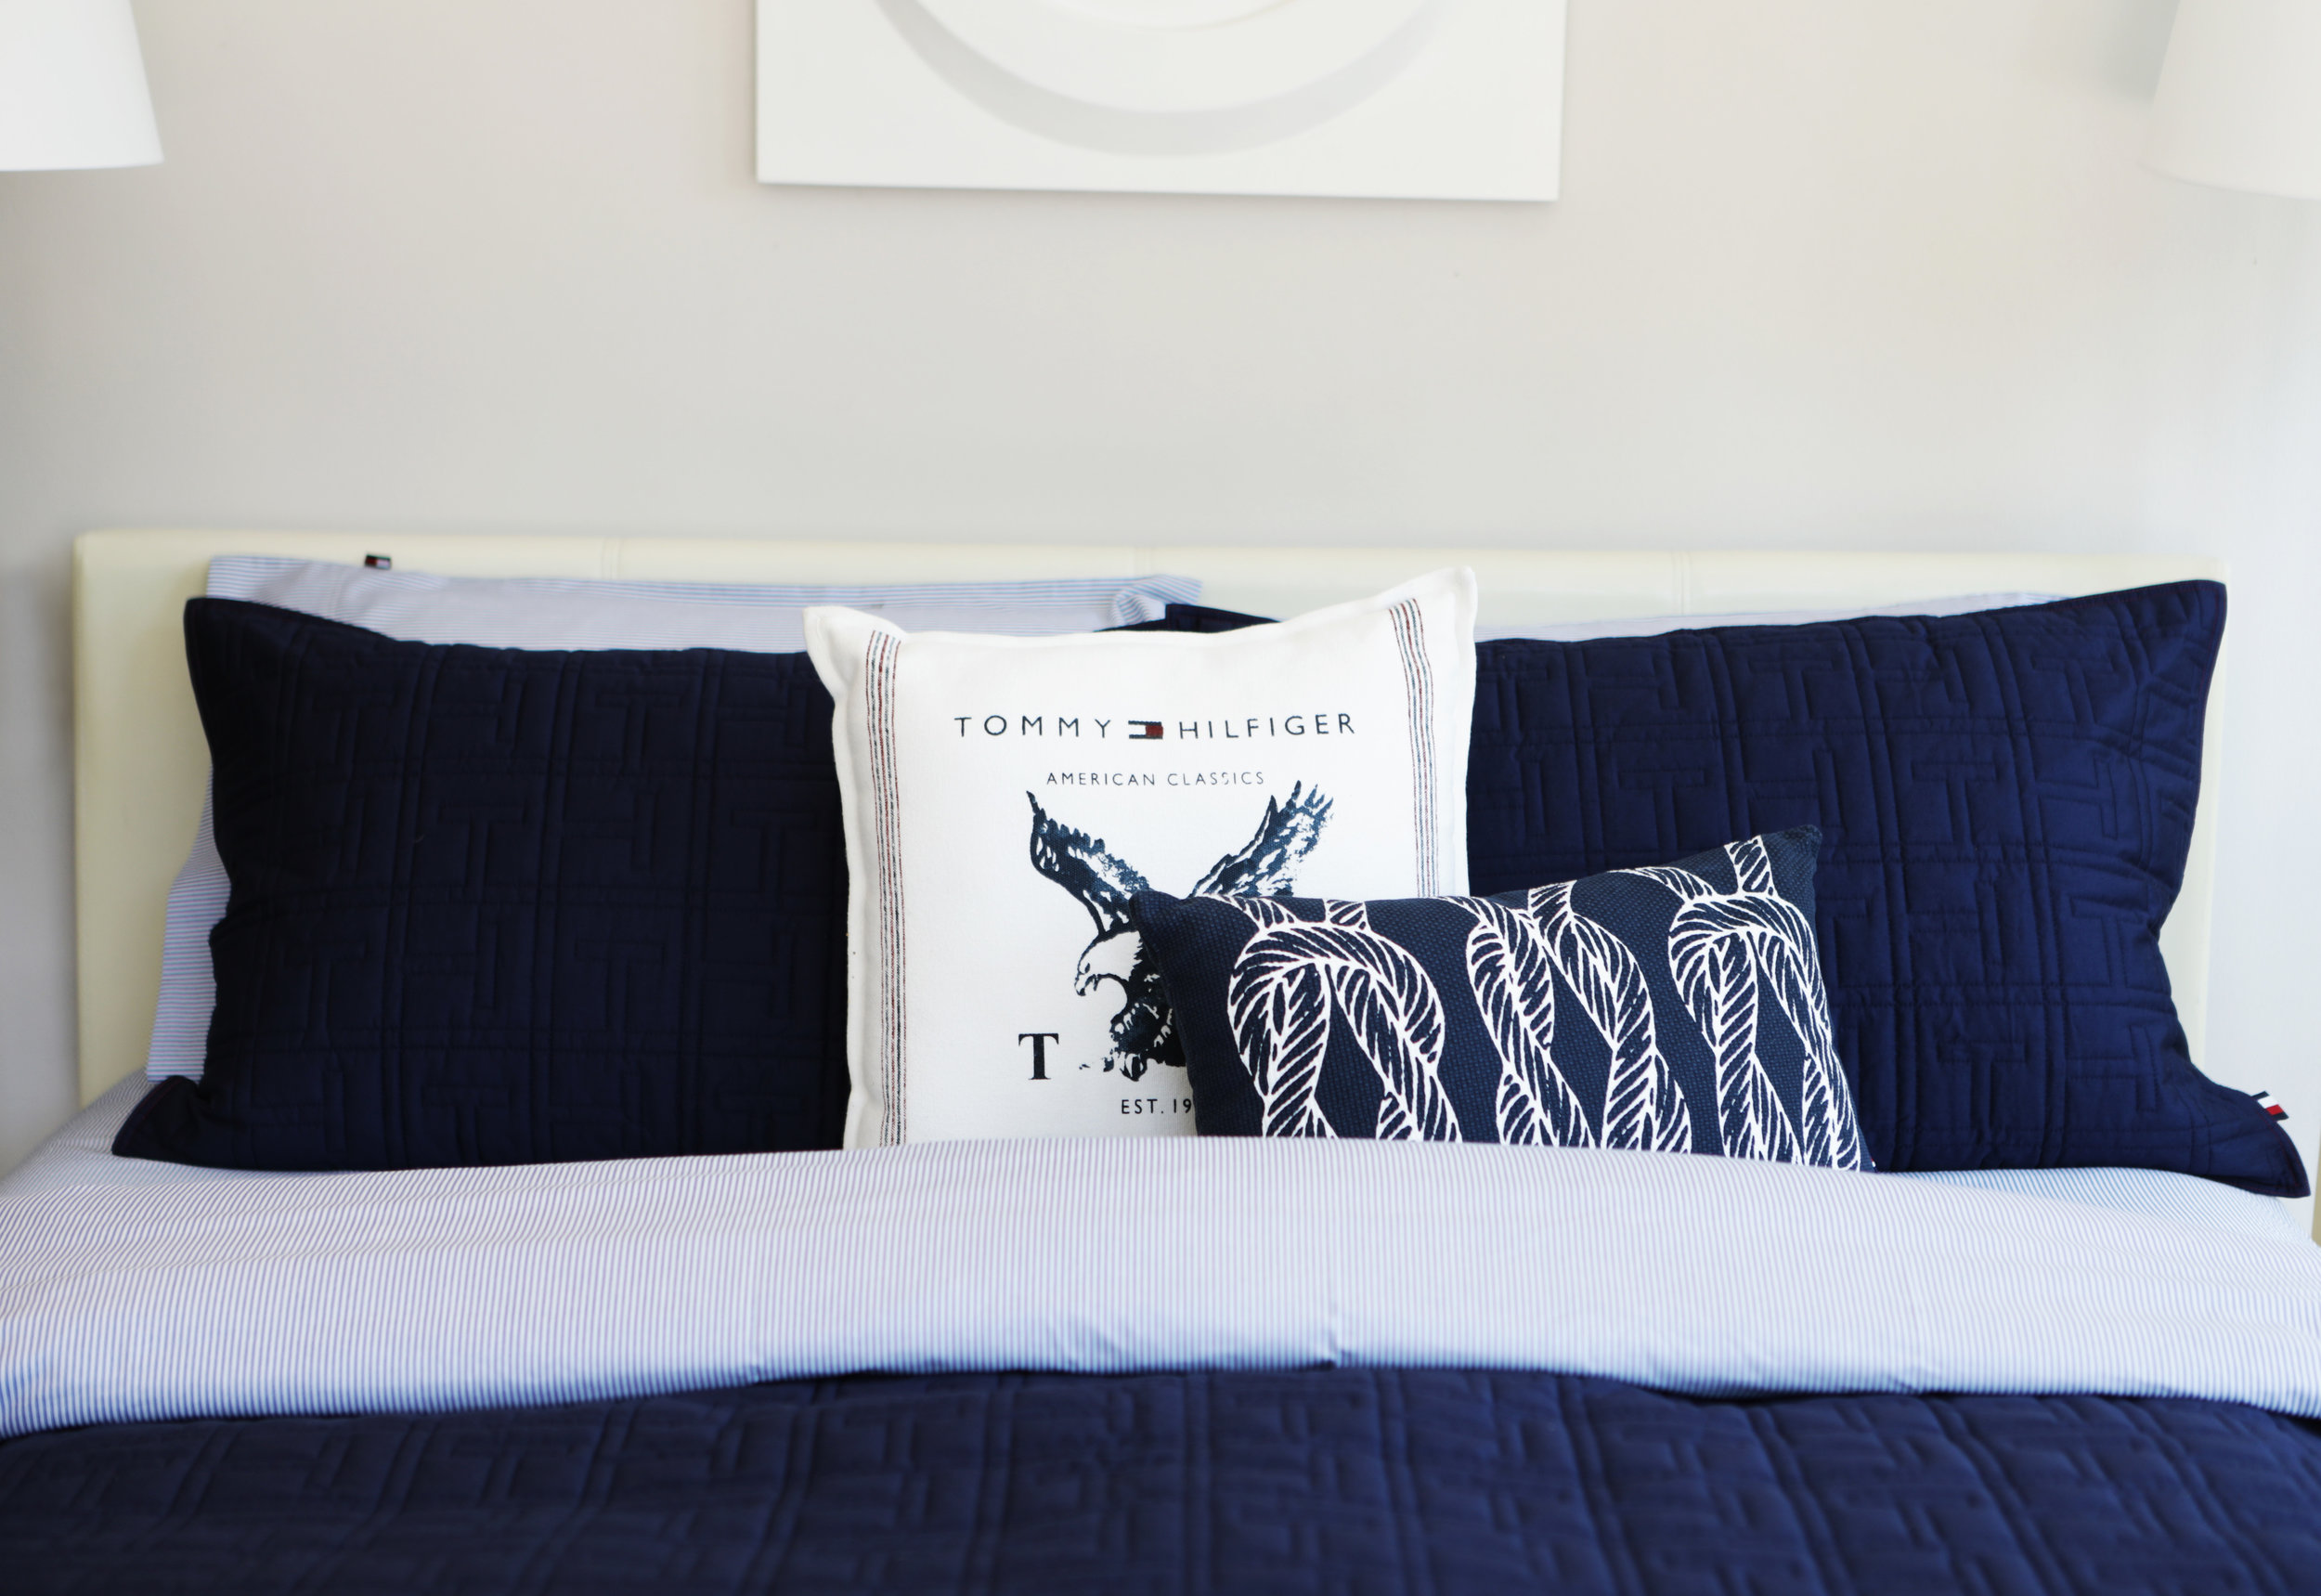 Passende plus Bærbar Styling the perfect guest bedroom — Steve Cordony